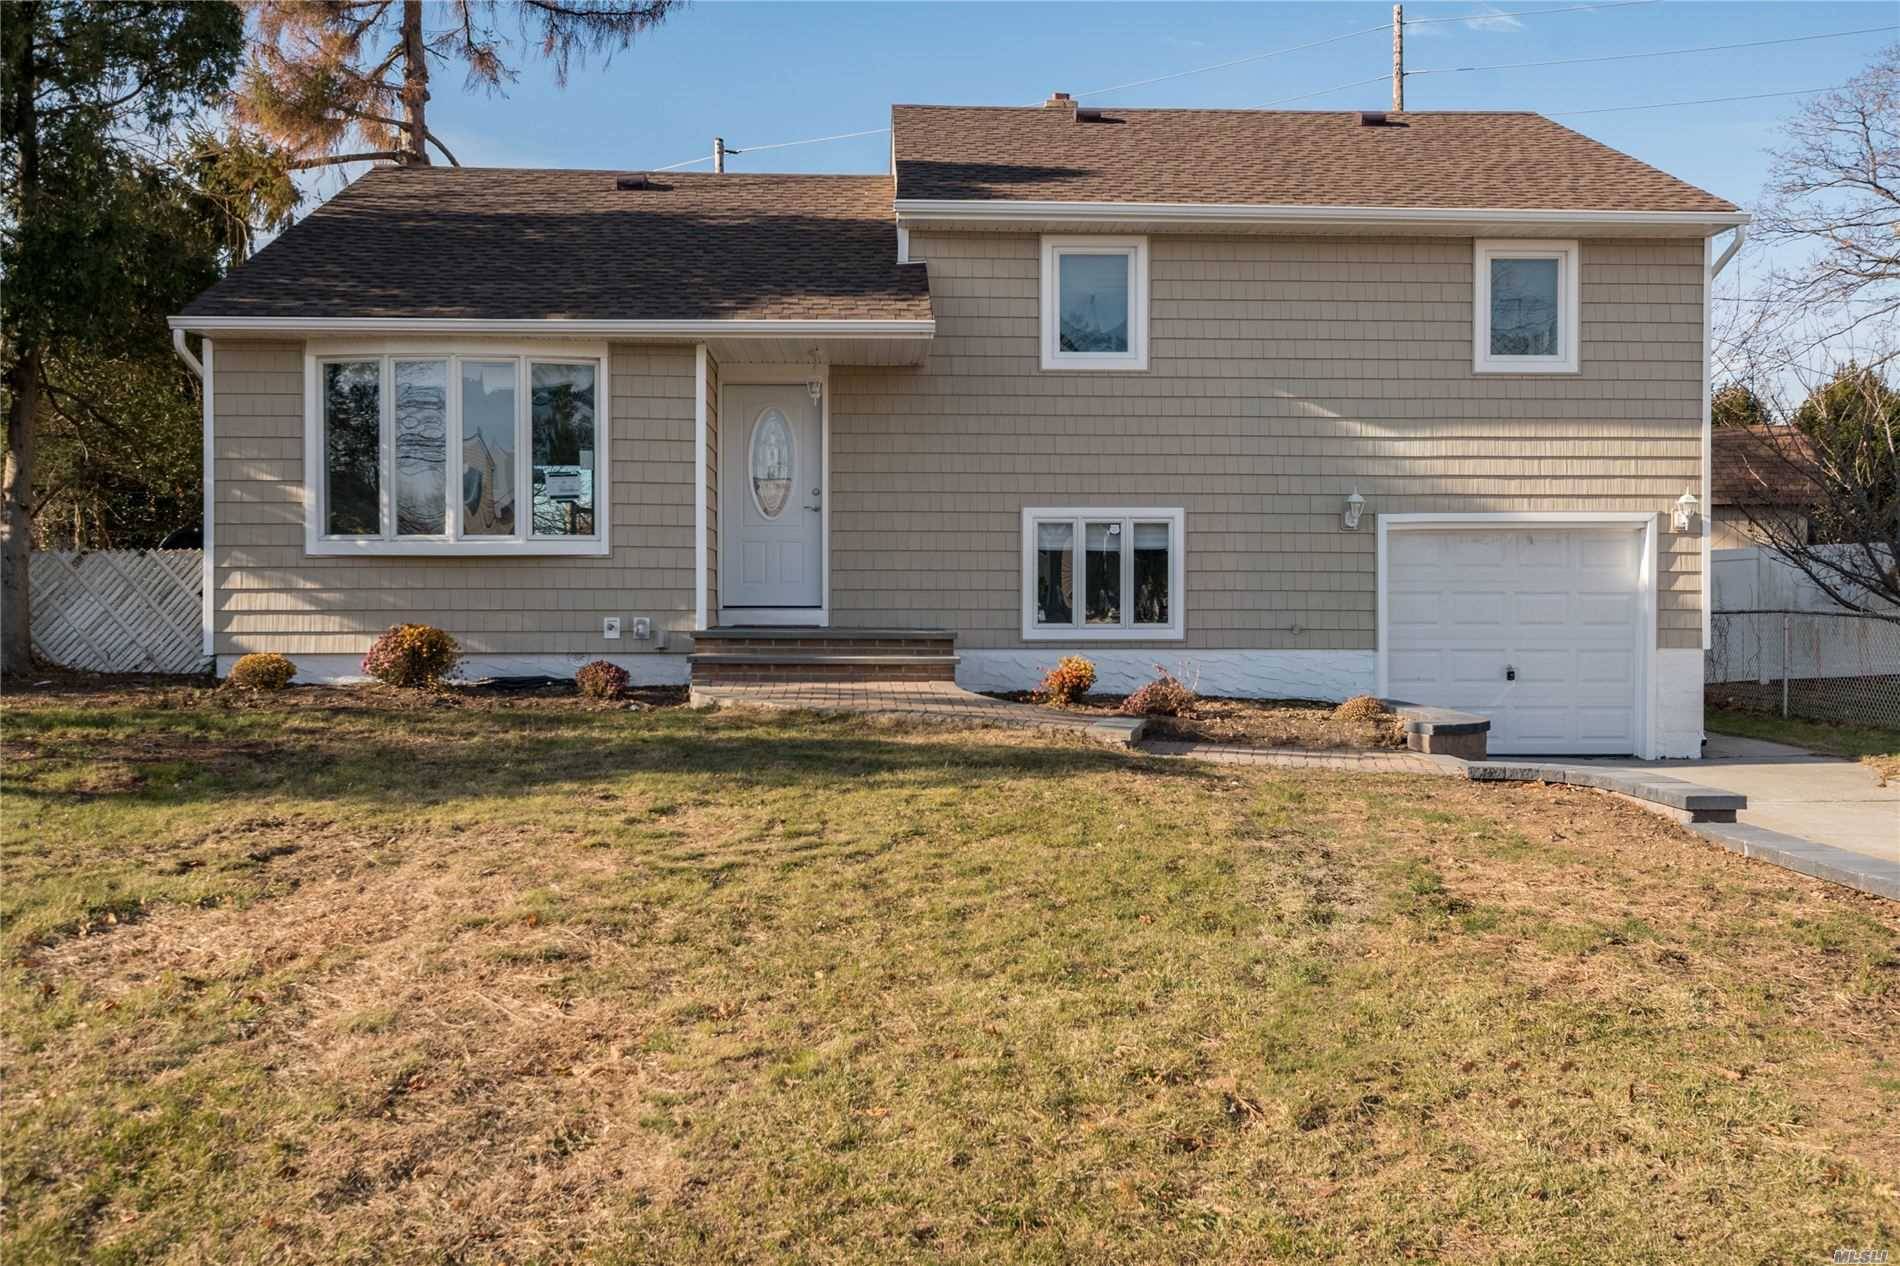 Split level 3 bedroom home that is completely renovated with quality craftmanship.